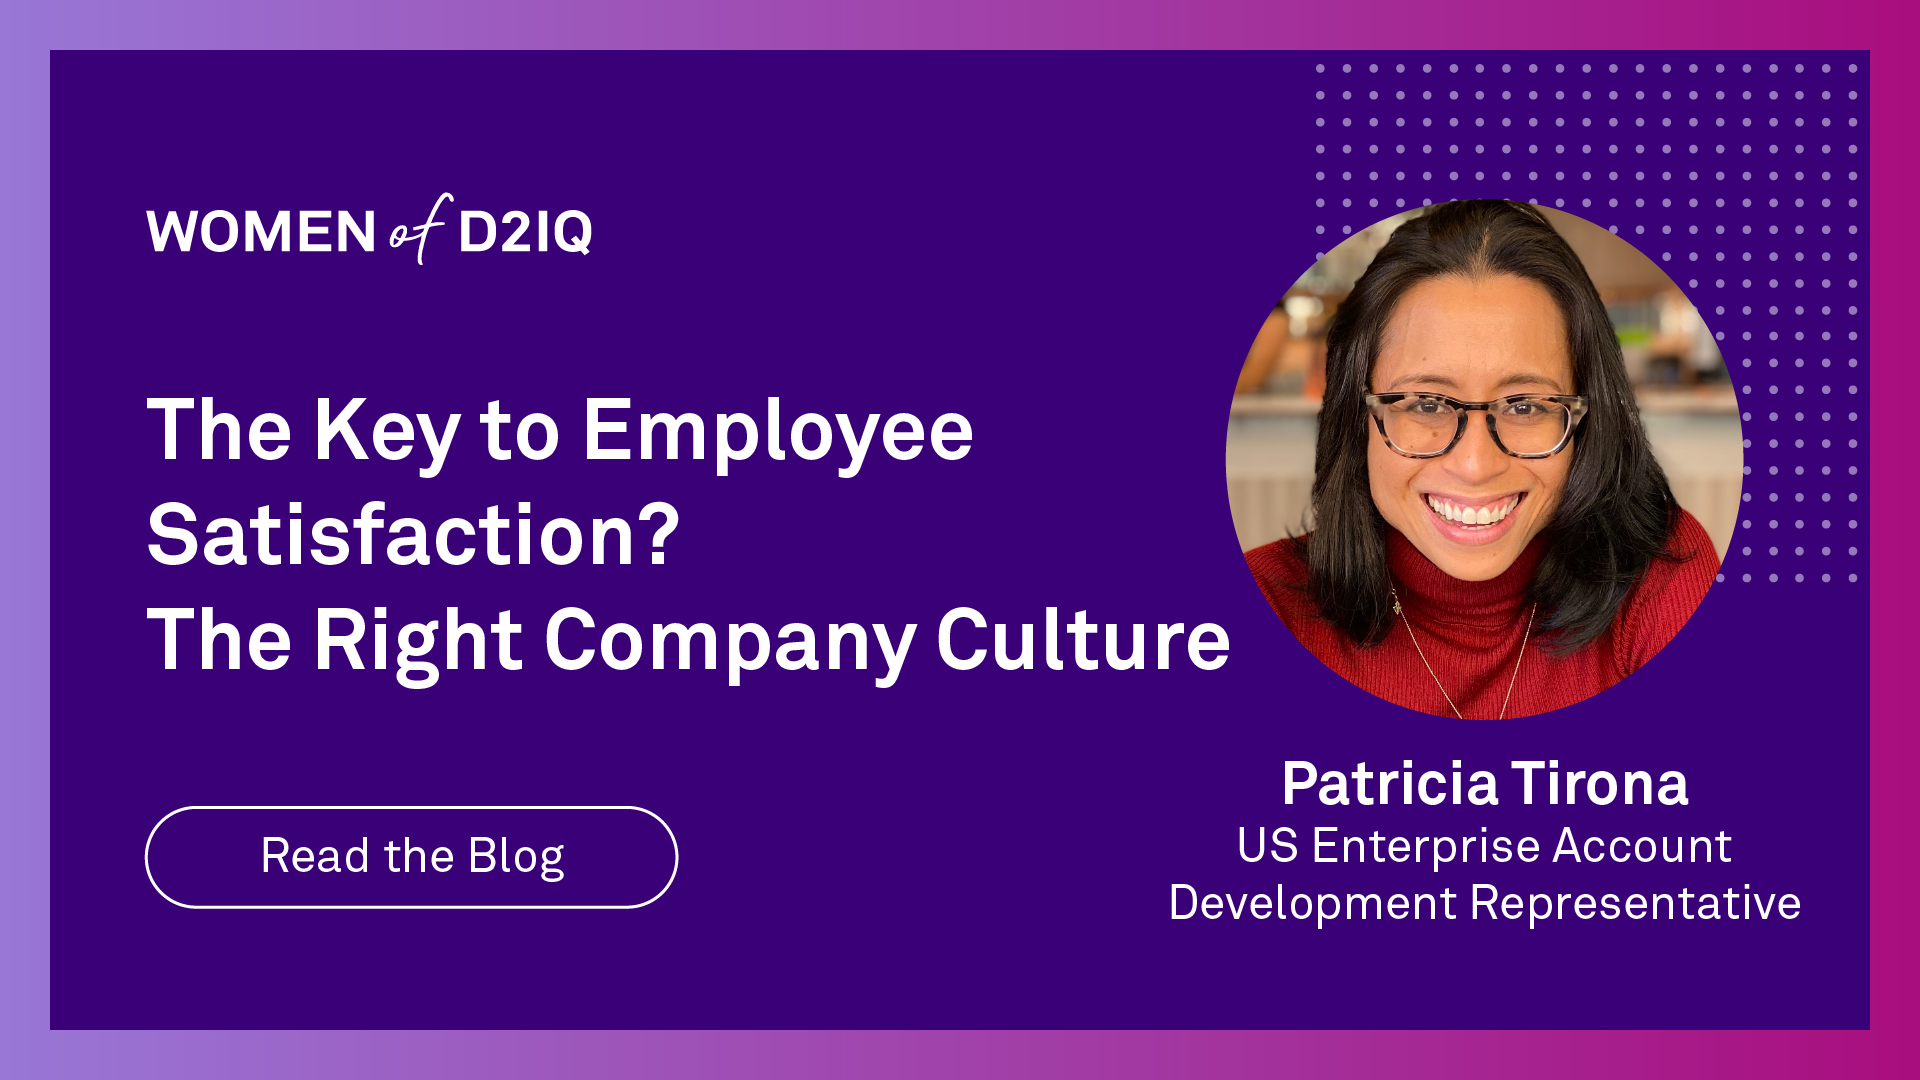 Women of D2iQ: The Key to Employee Satisfaction? The Right Company Culture